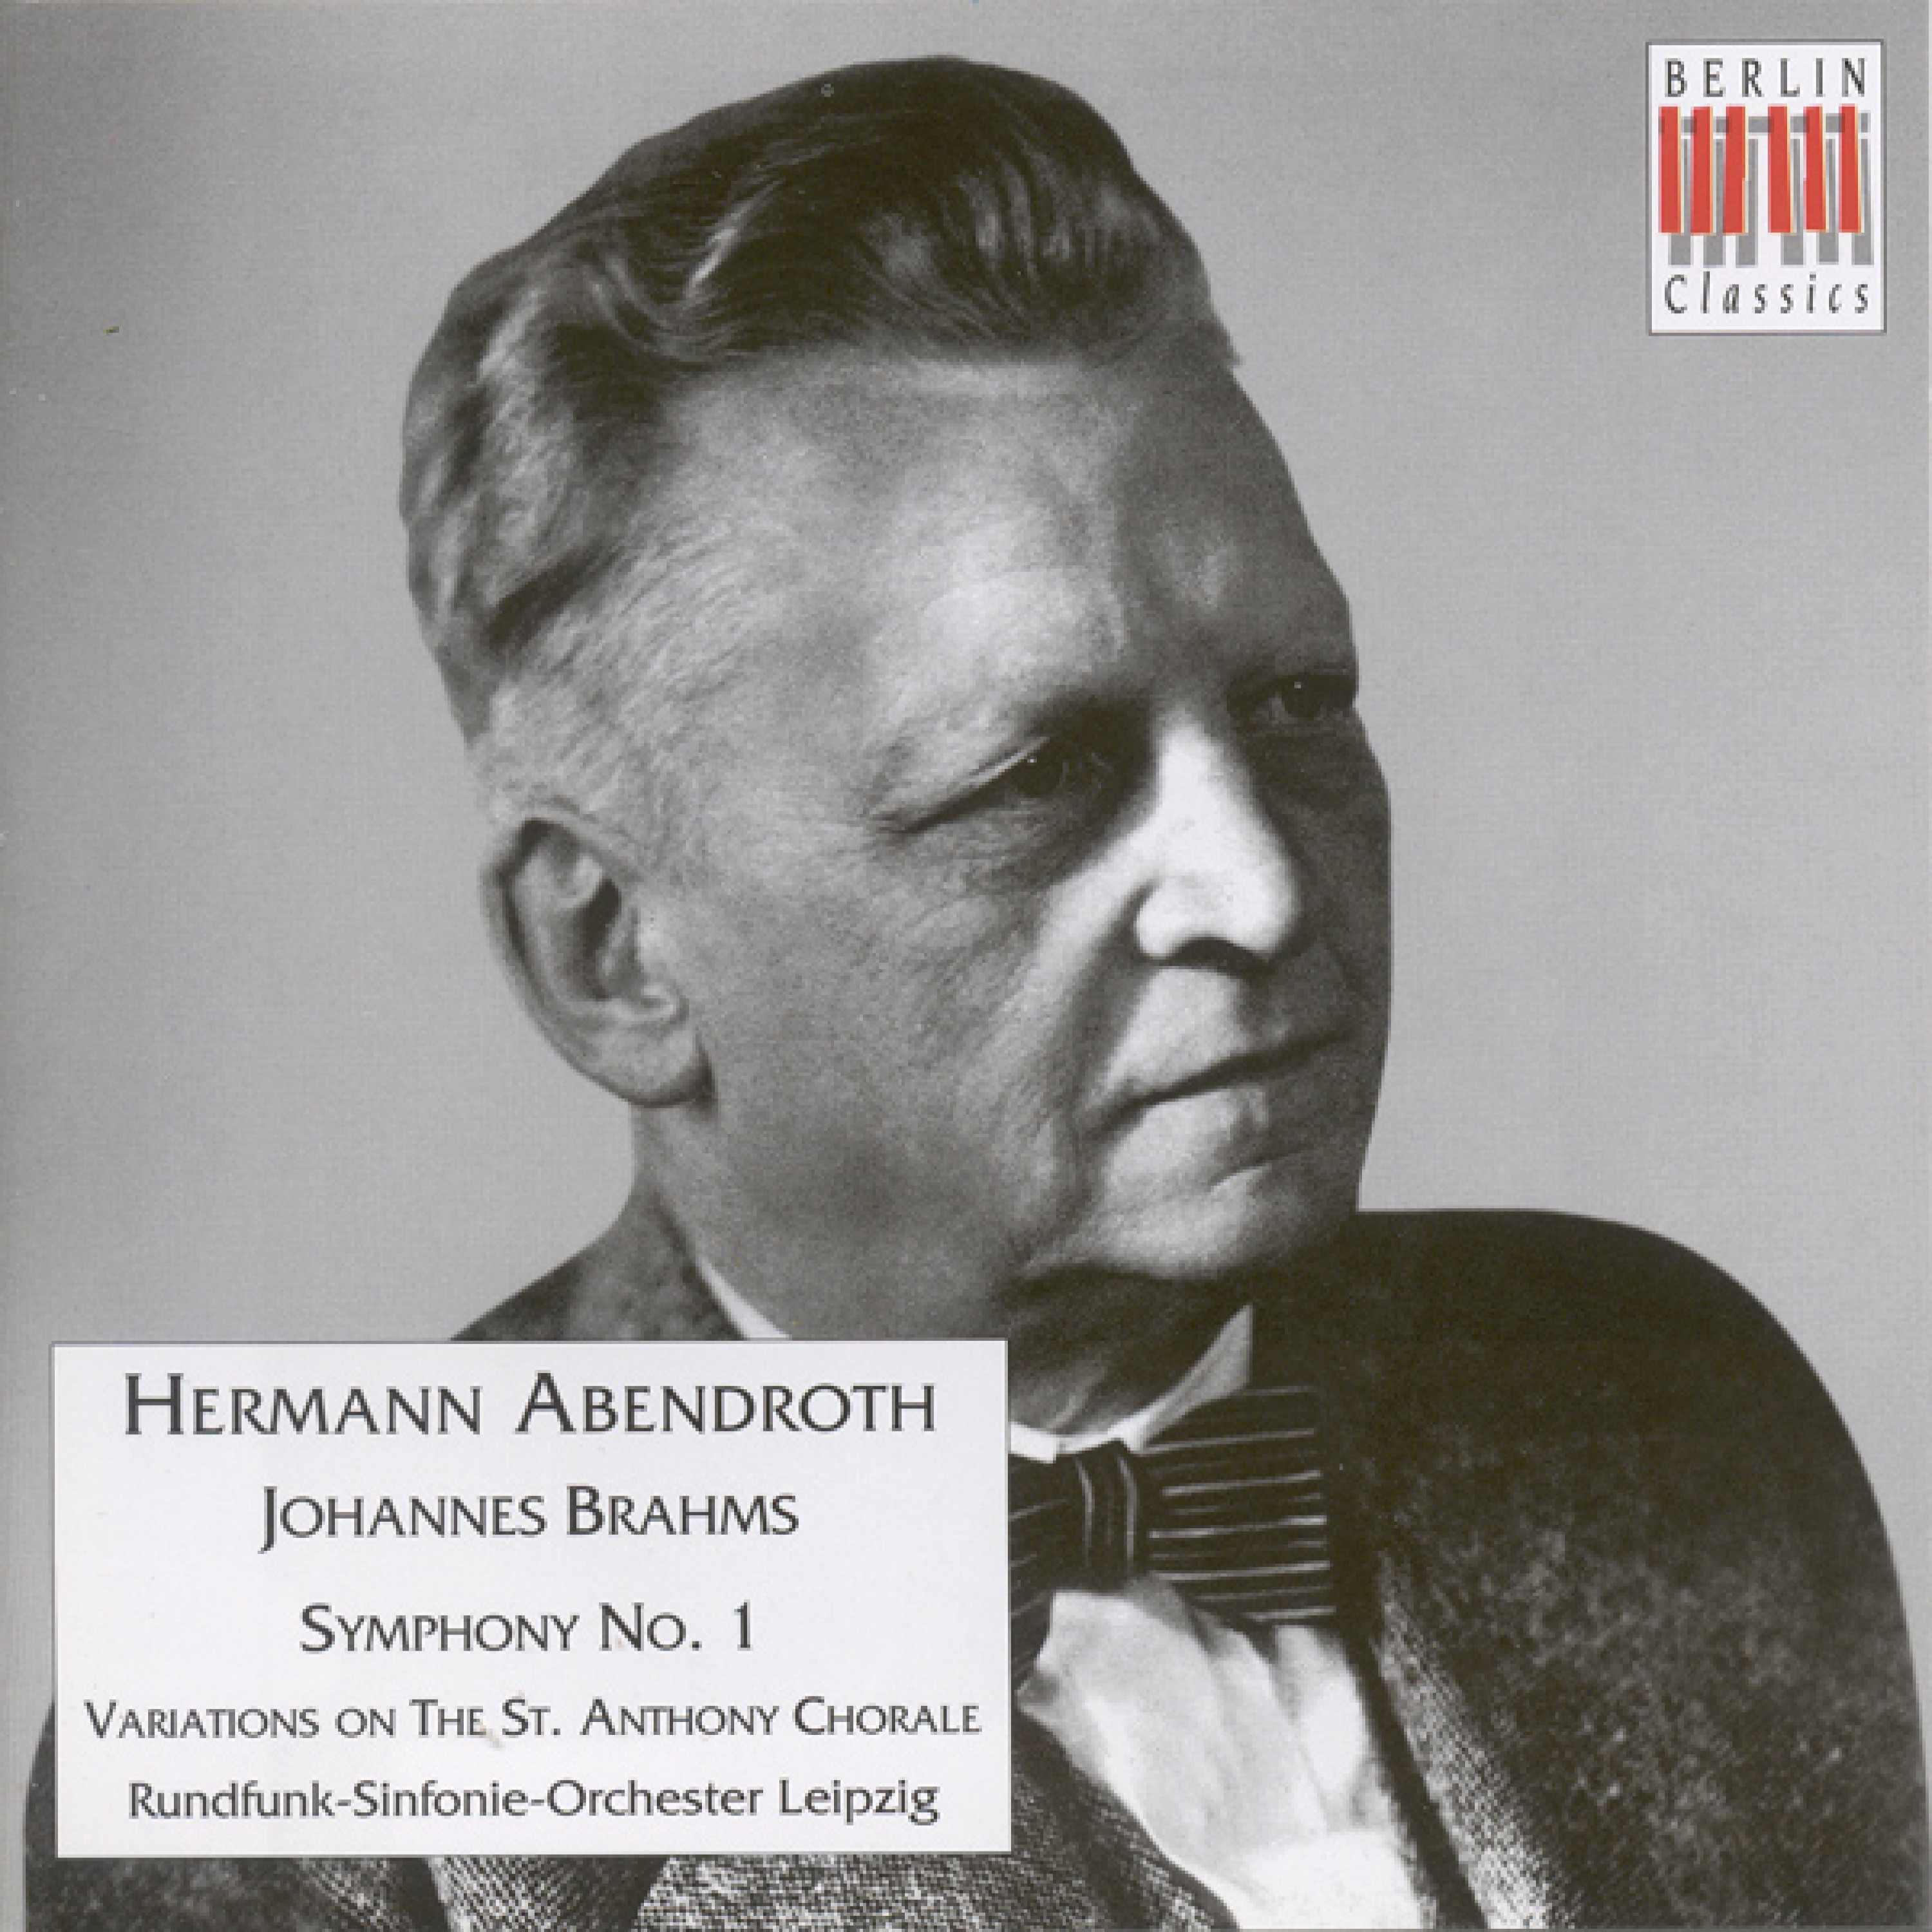 Variations on a Theme by Haydn, Op. 56a, "St. Anthony Variations": Variation 2: Vivace